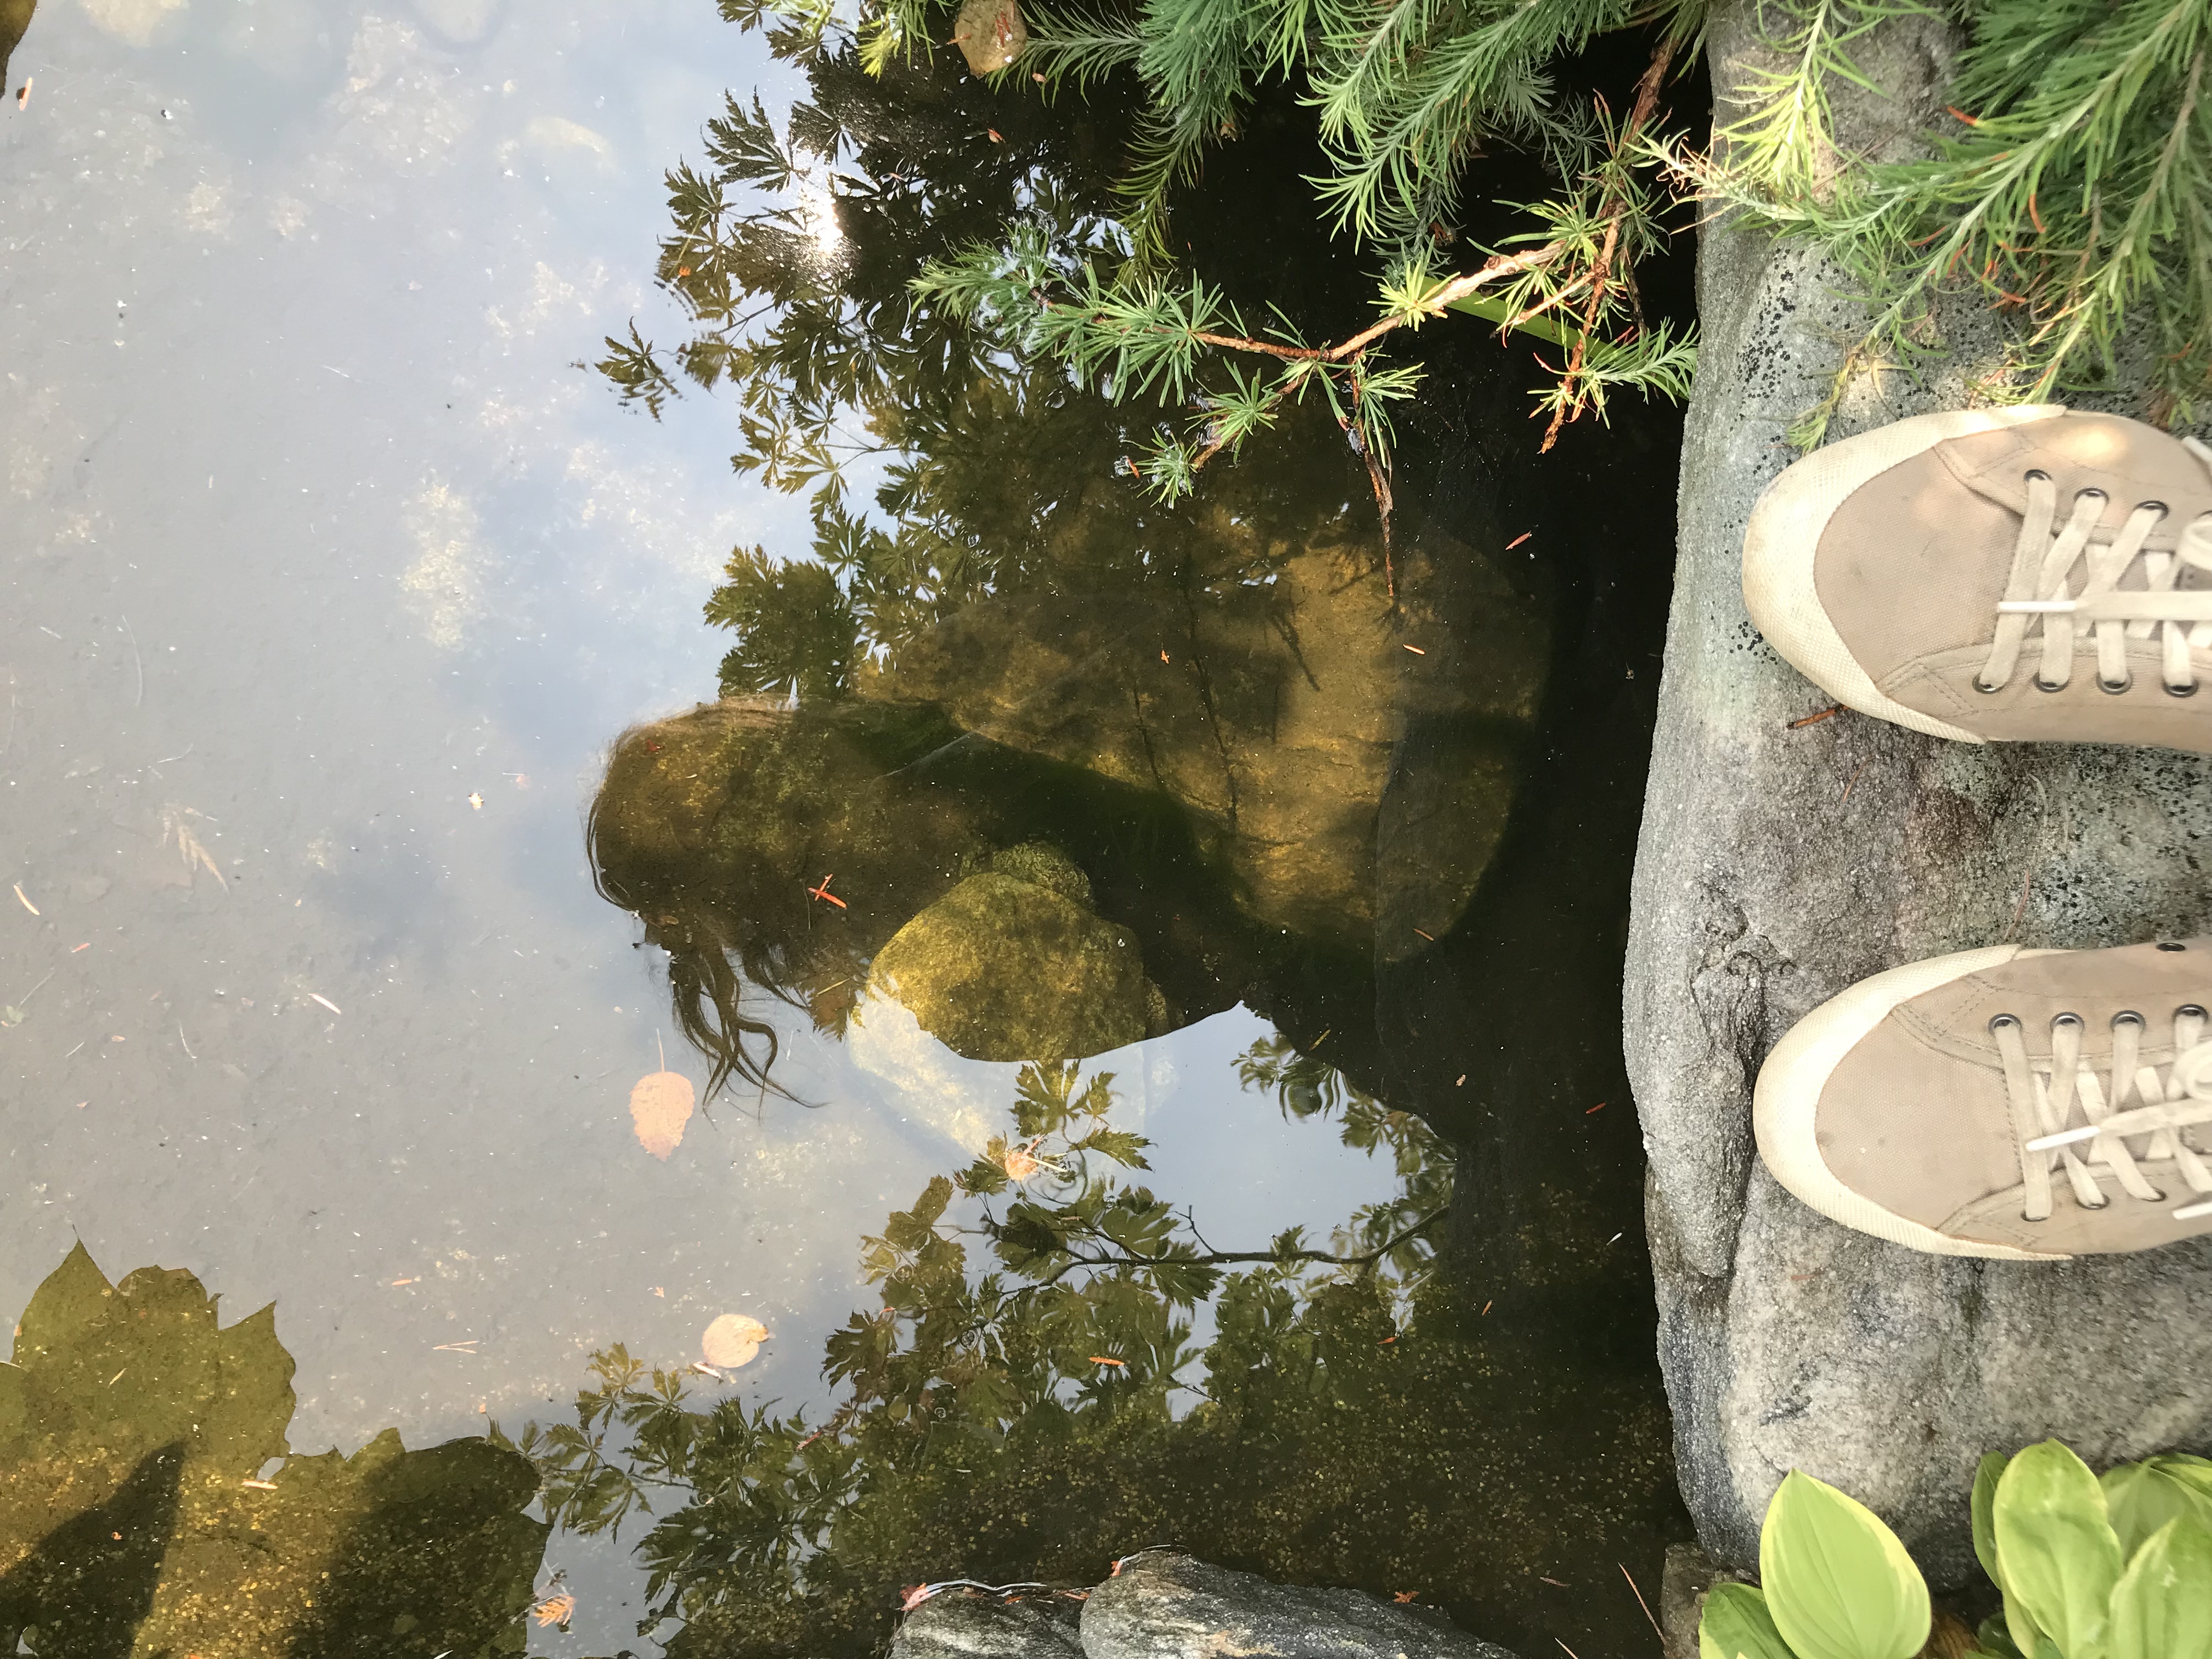 Artist stand on the edge of a shallow pond. Canvas shoes can be seen as can the rough reflection of the artist in the water along with light refracting against algae covered stones underwater